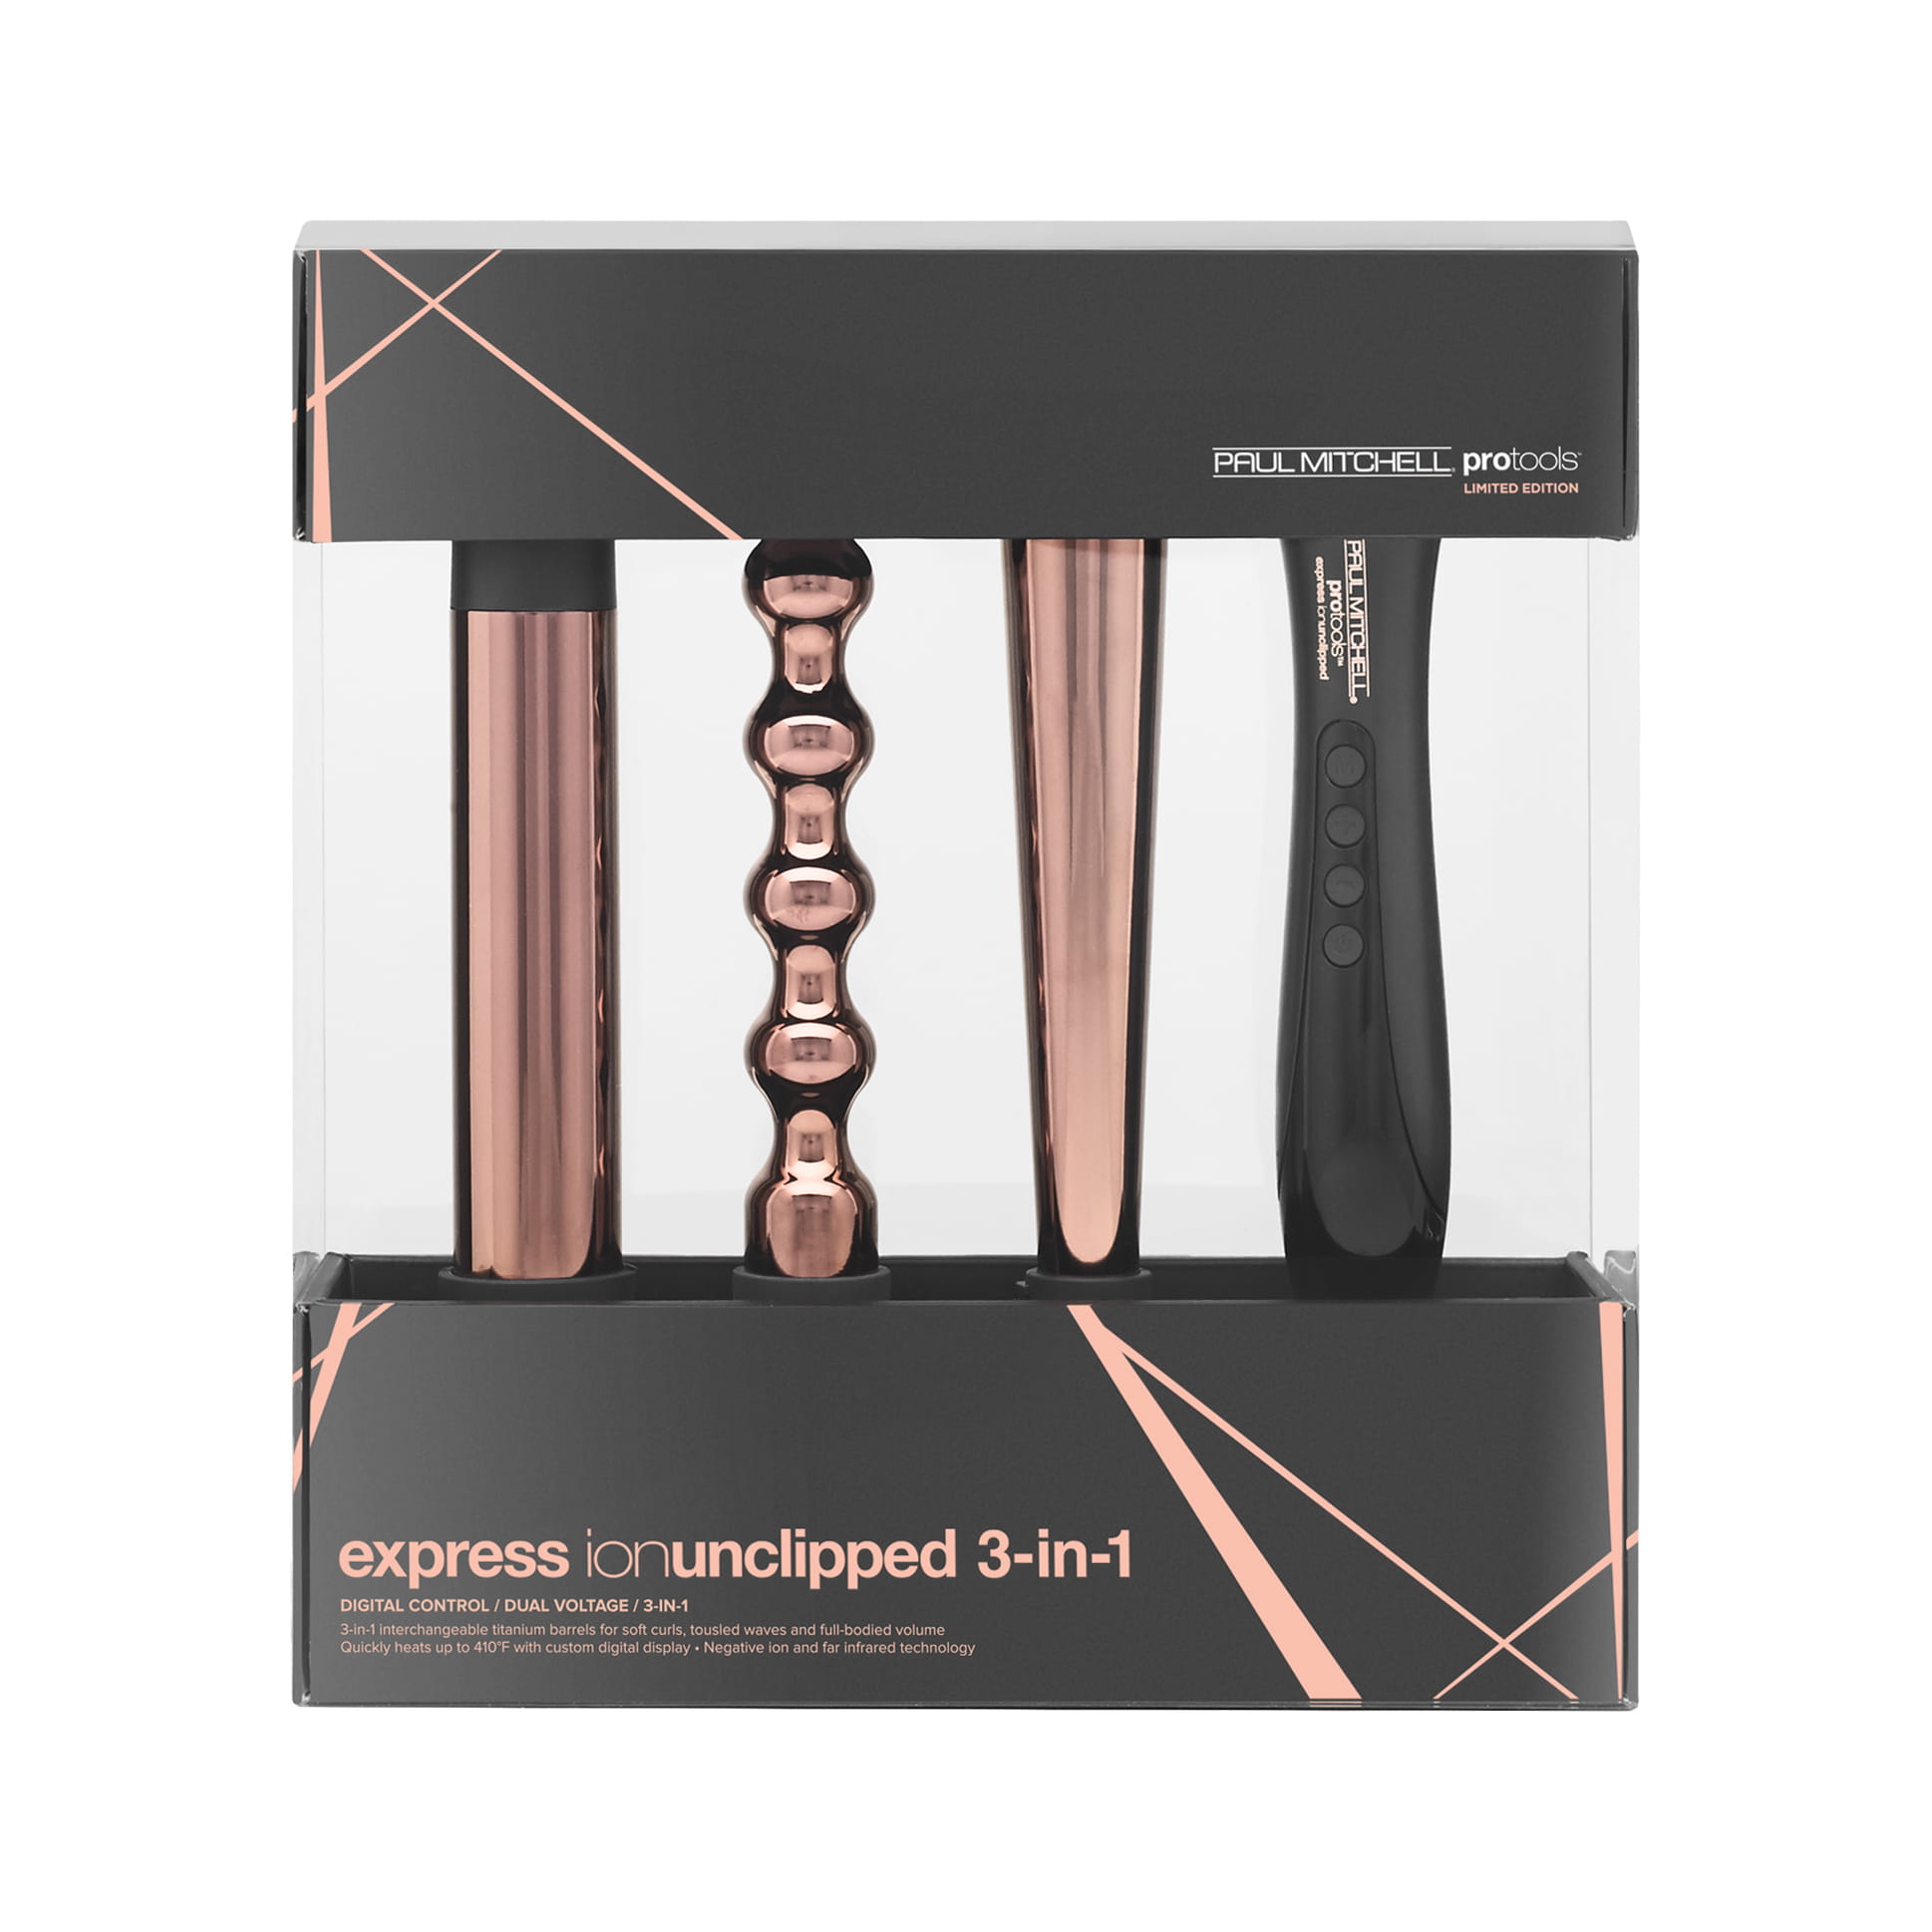 Lokówka PAUL MITCHELL Express Ion Unclipped 3in1 Limited Edition